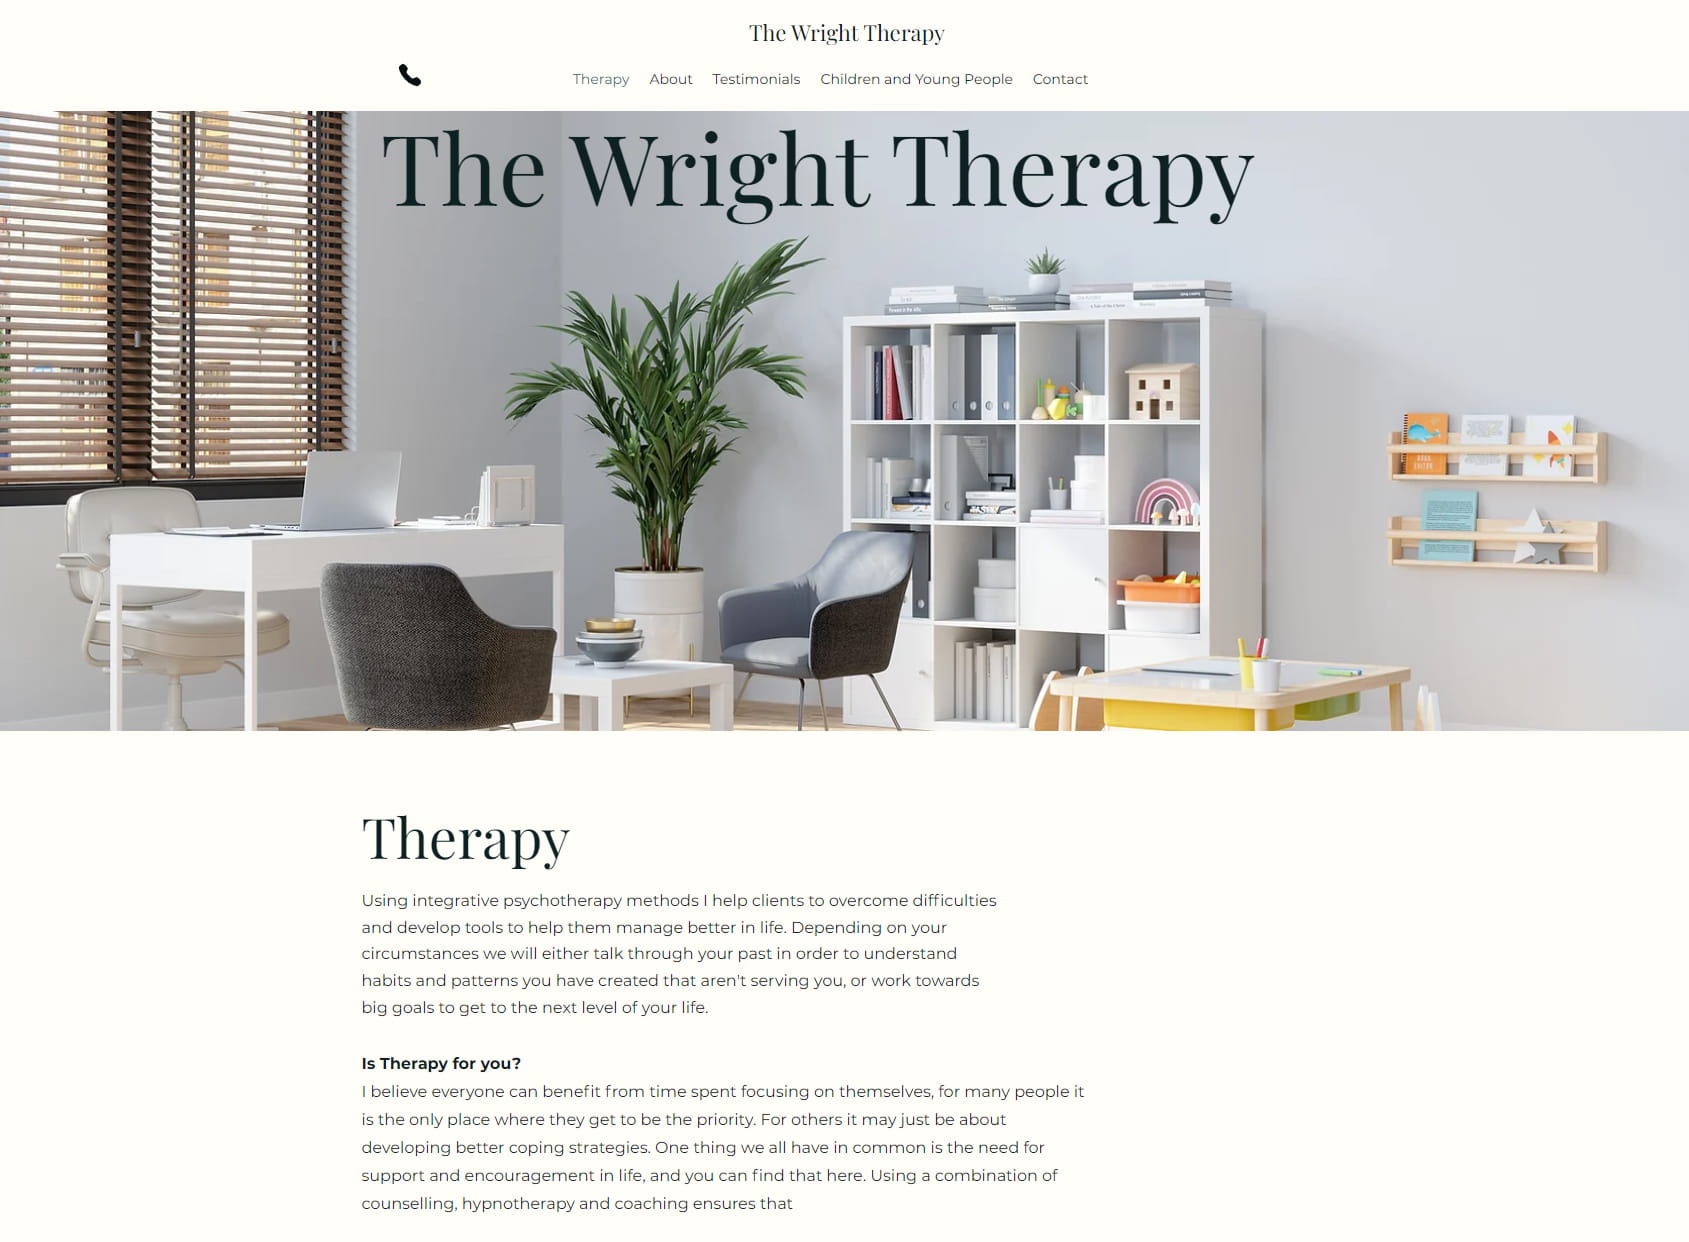 The Wright Therapy